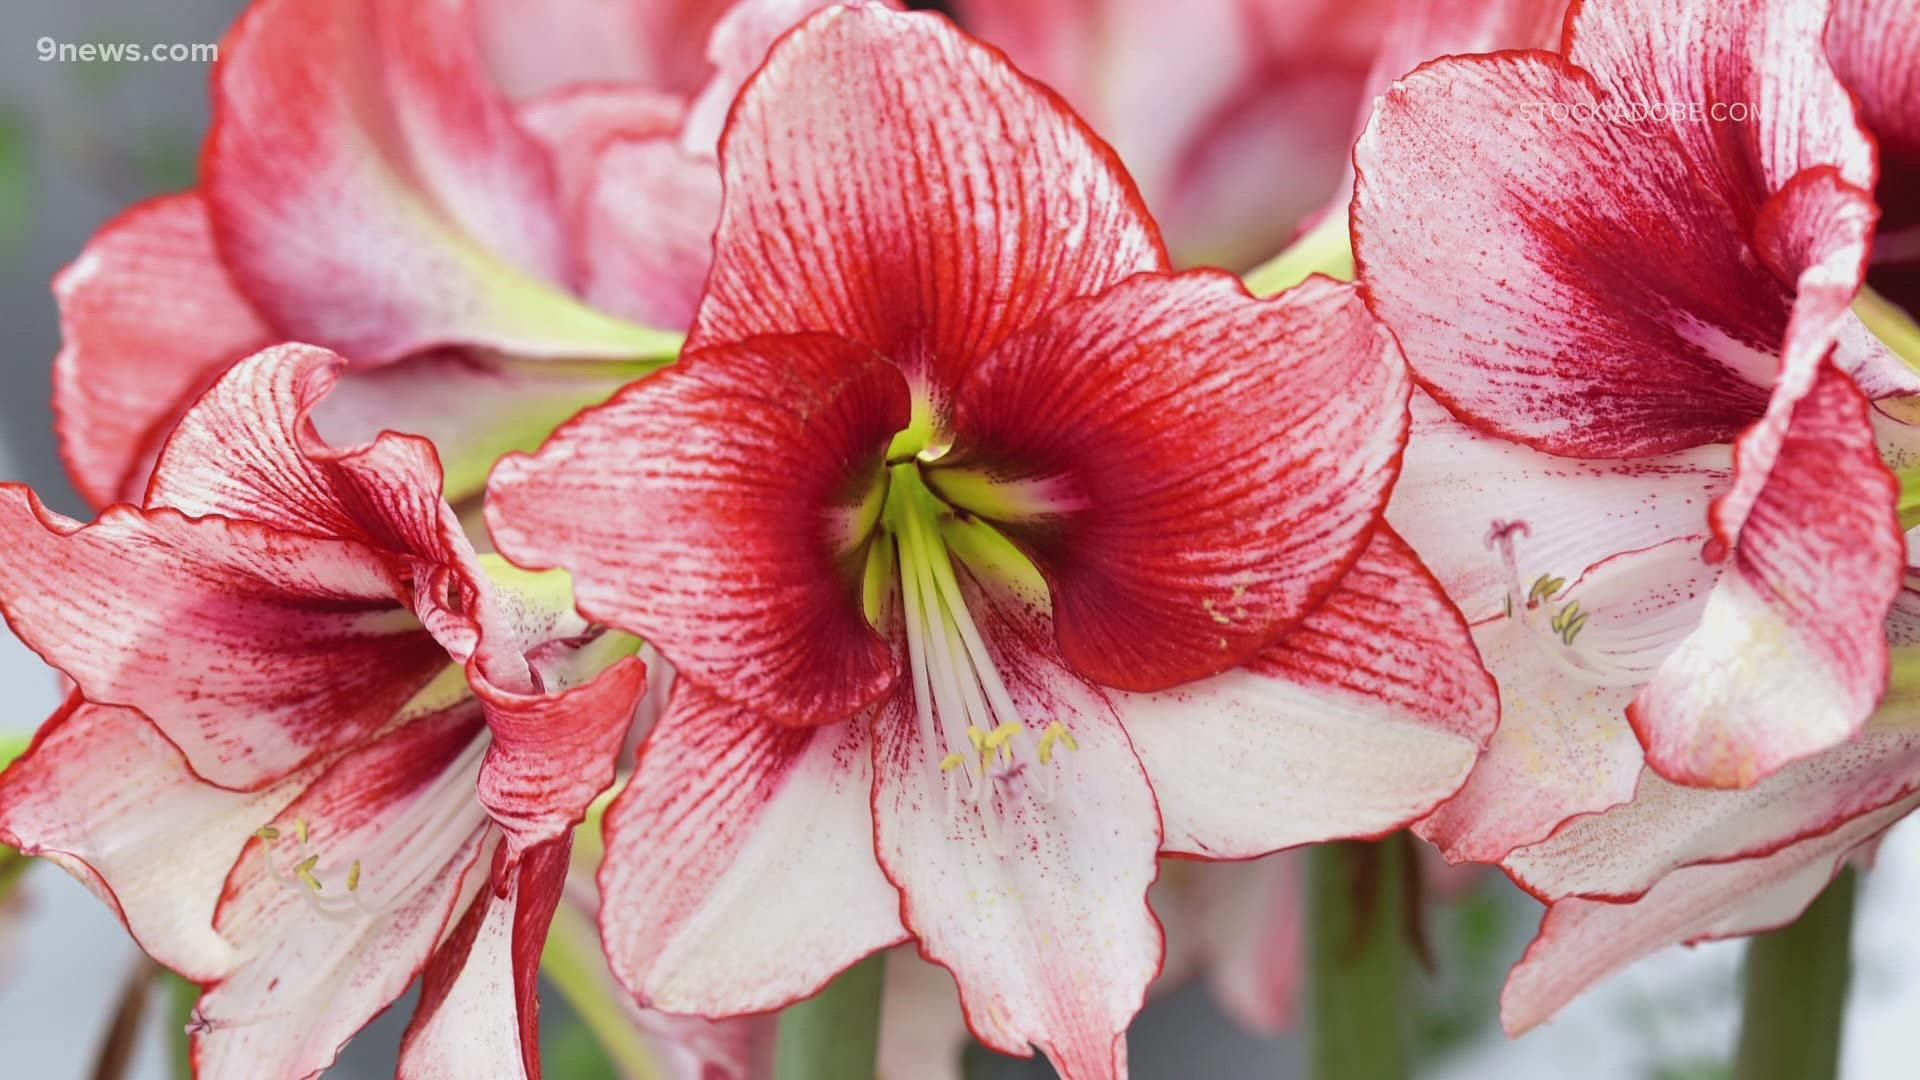 The bright, long-lasting blooms of Amaryllis and Paperwhites add a lovely splash of color and pleasant scents to your holiday décor.